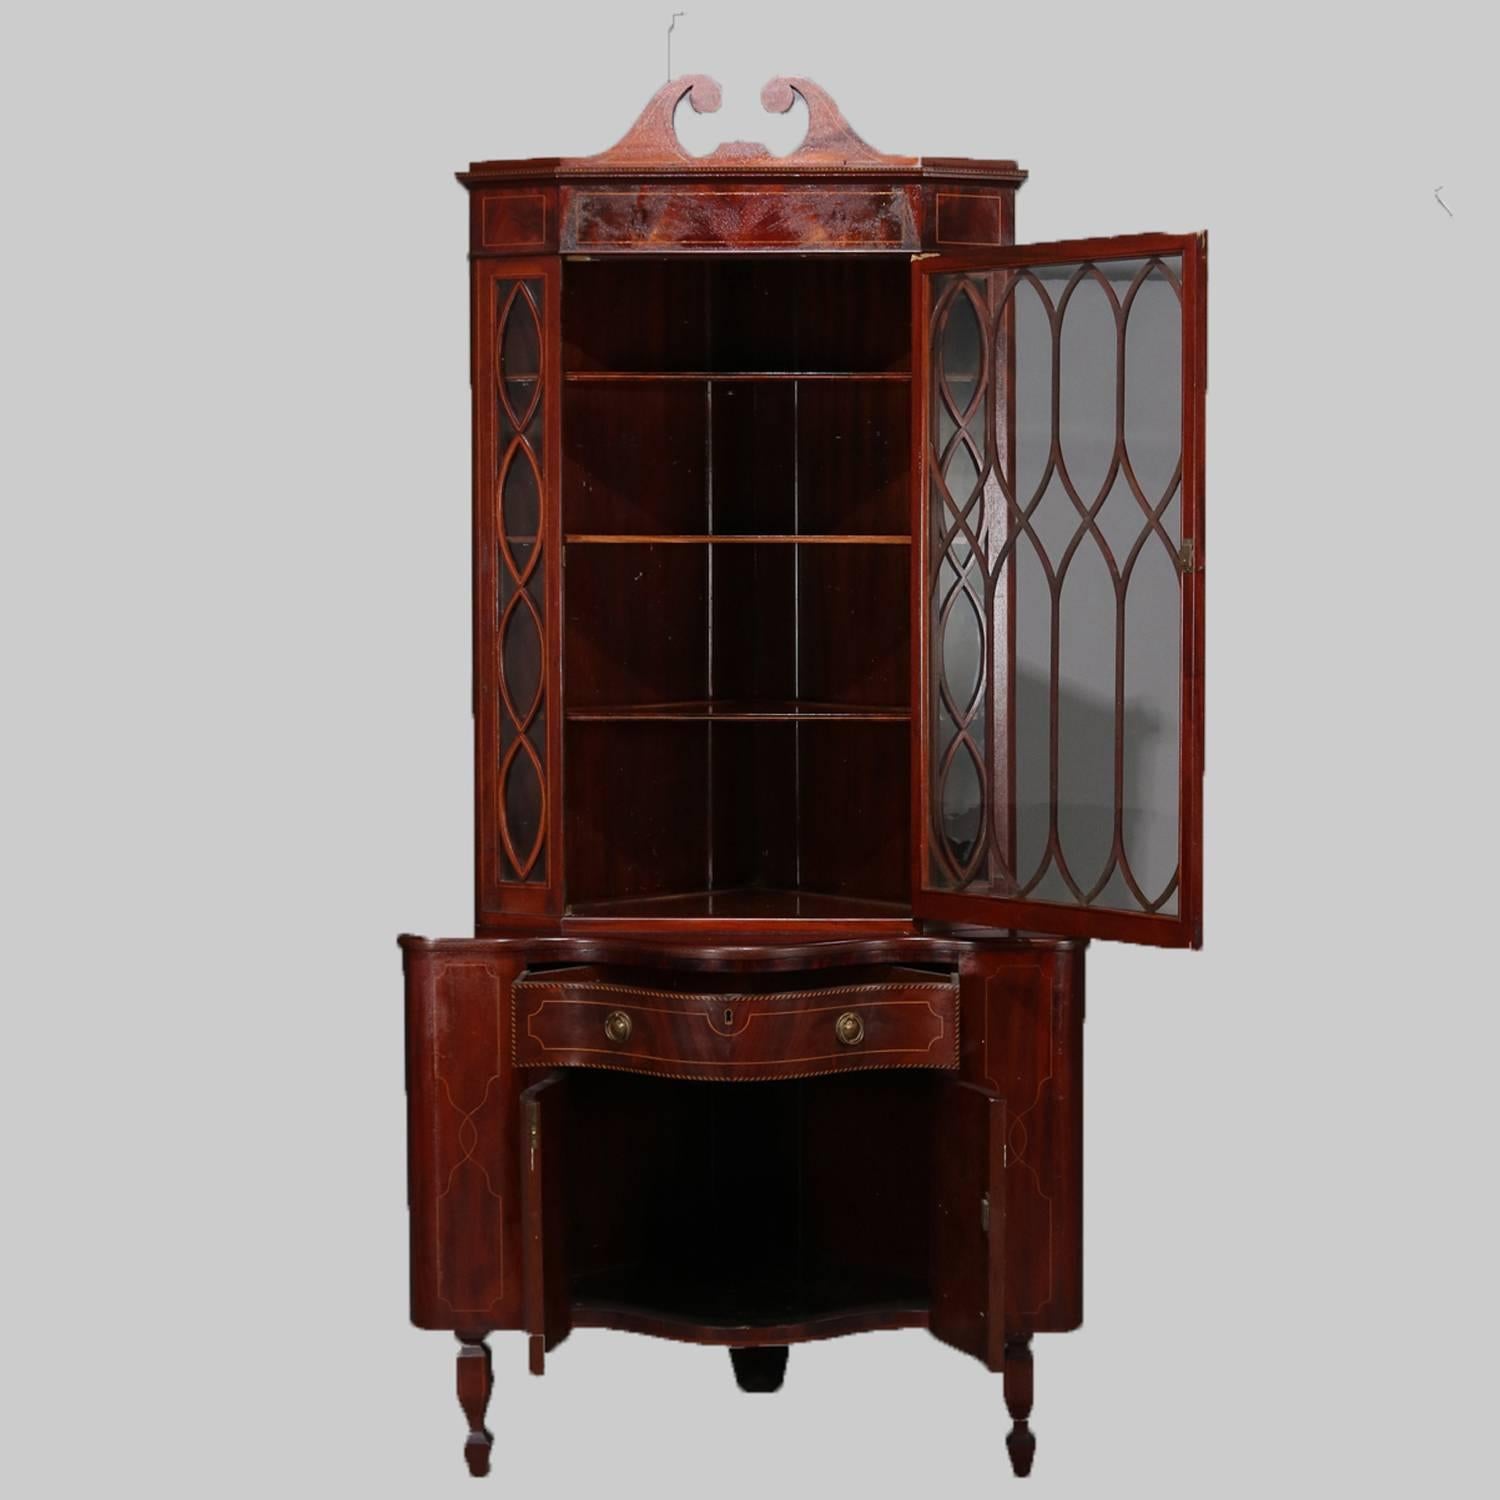 American Antique Federal Flame Mahogany and Satinwood Inlay Serpentine Corner Cabinet